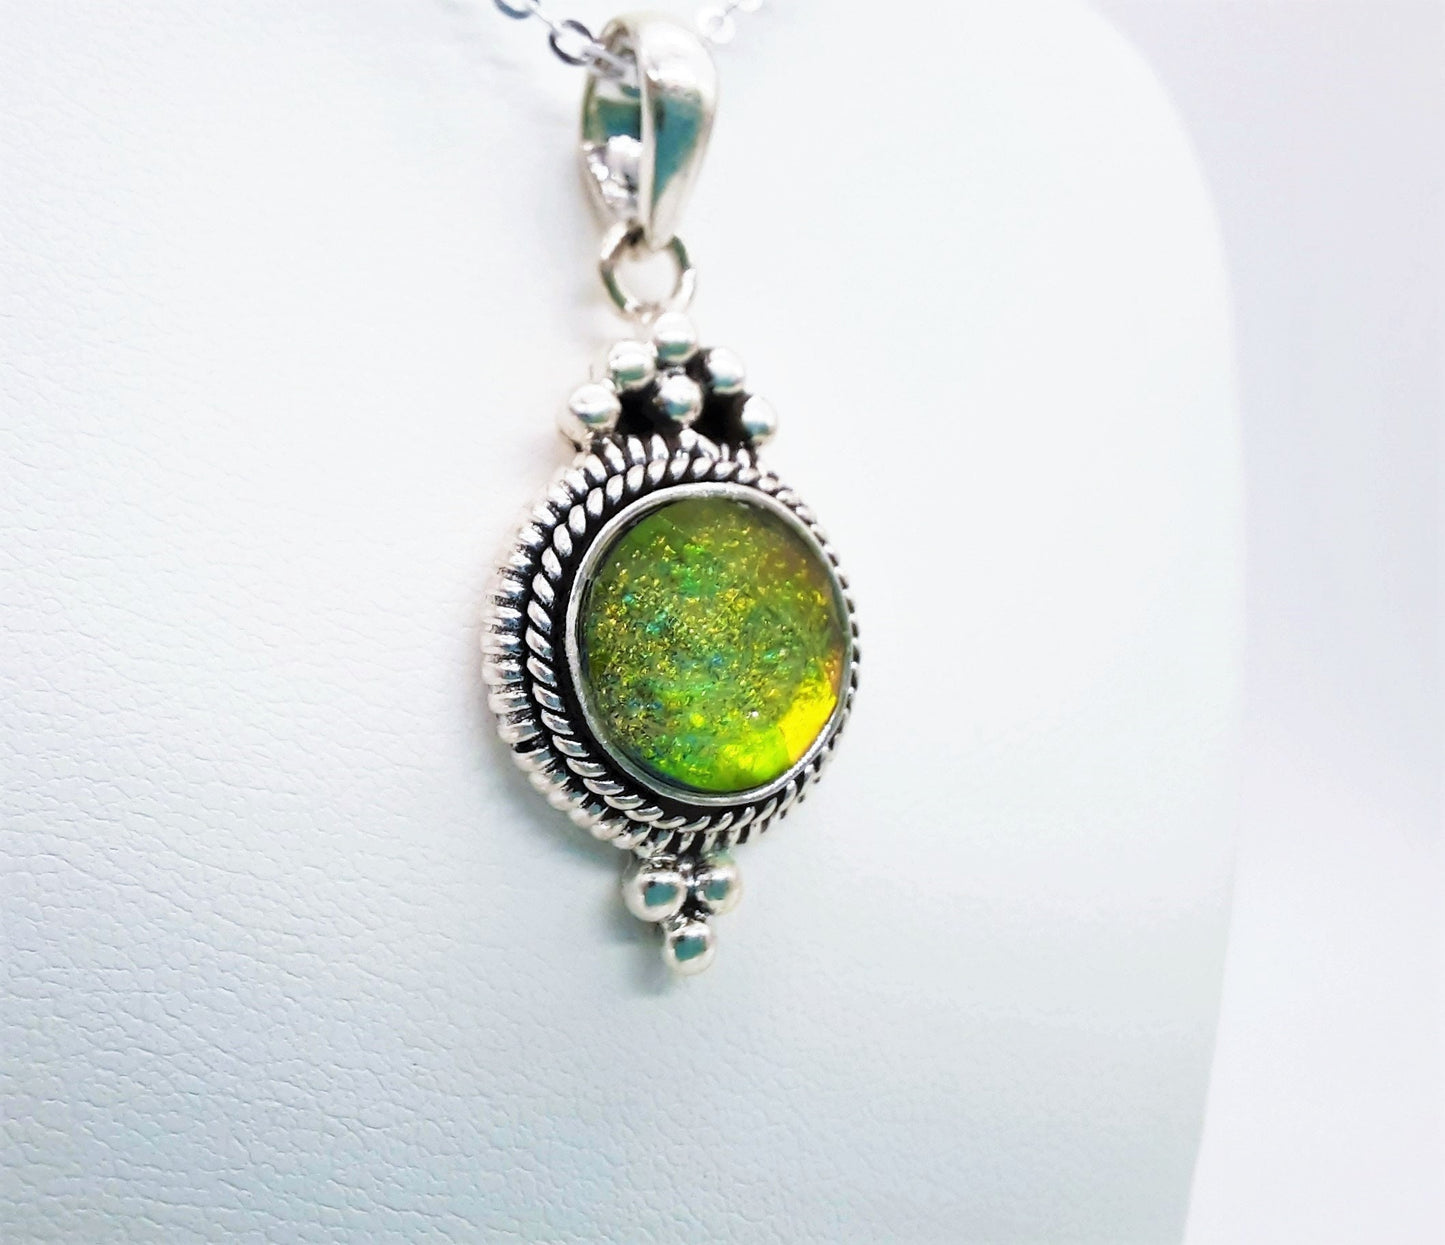 Antique Double Spiral Design 925 Sterling Silver Pendant Necklace with 10mm Orange /Green Glass Cabochon Setting